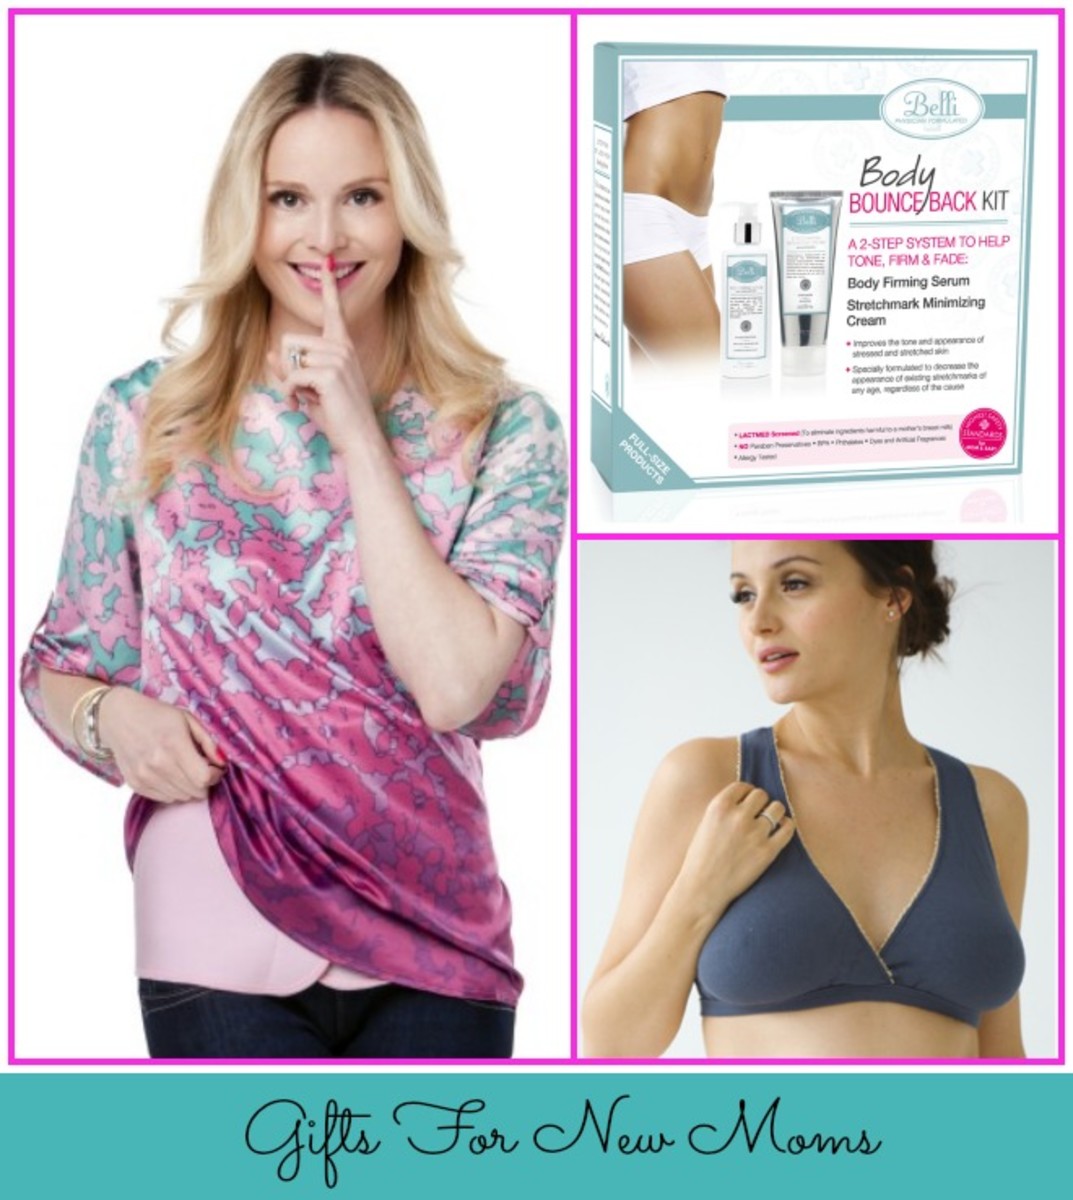 gifts for new moms, rosie pope organic band, belabumbum, belli skincare